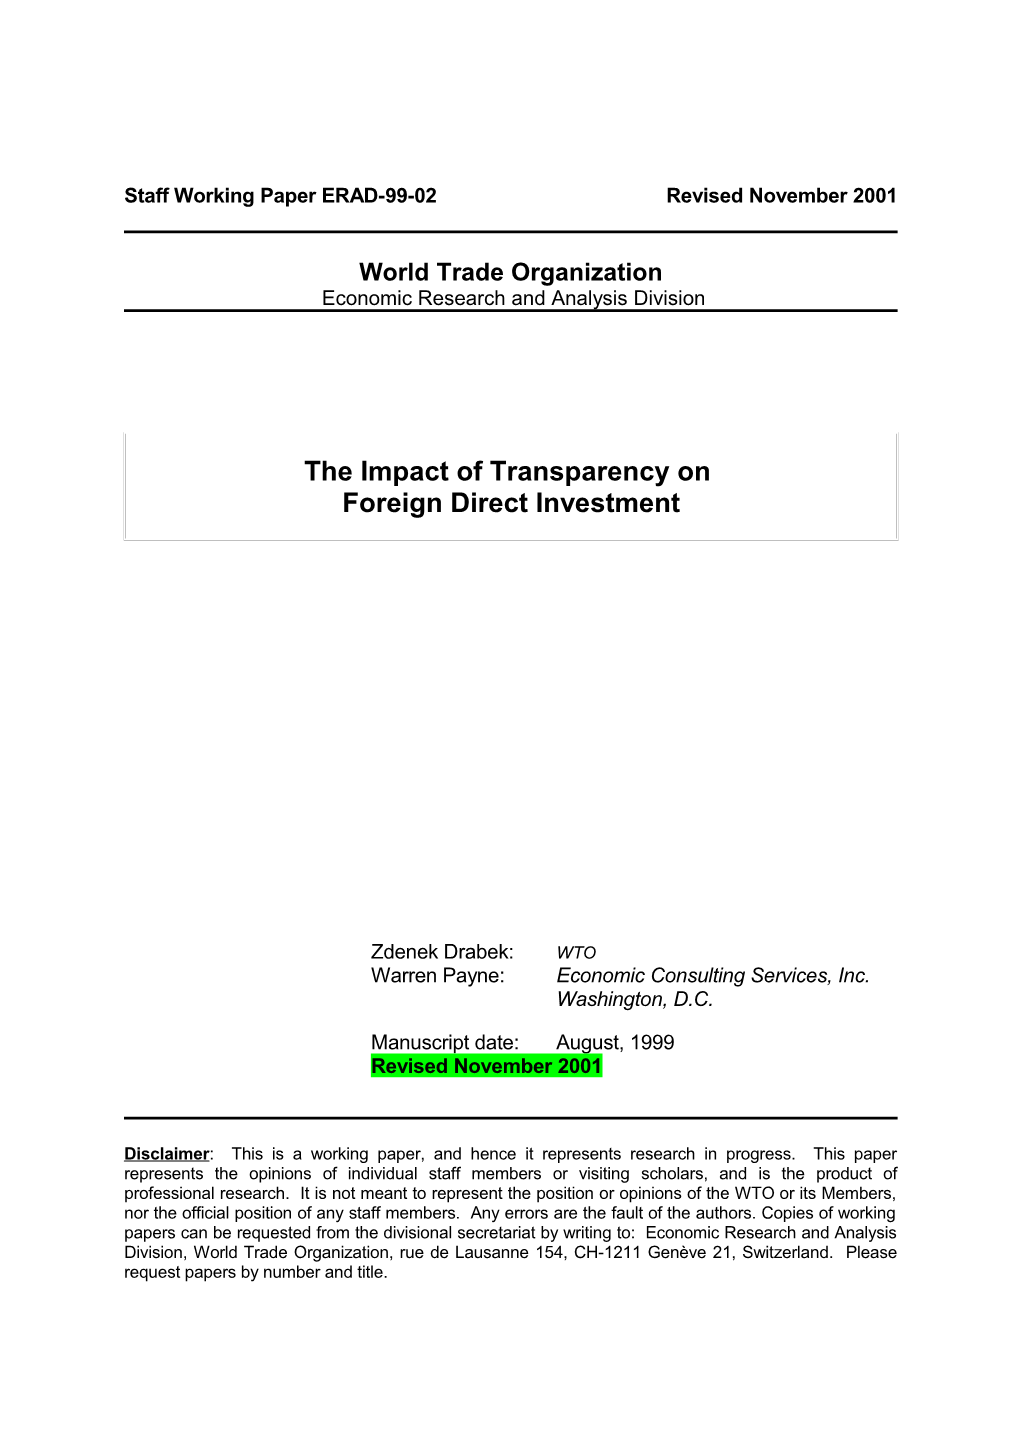 The Impact of Non-Transparency on Foreign Direct Investment